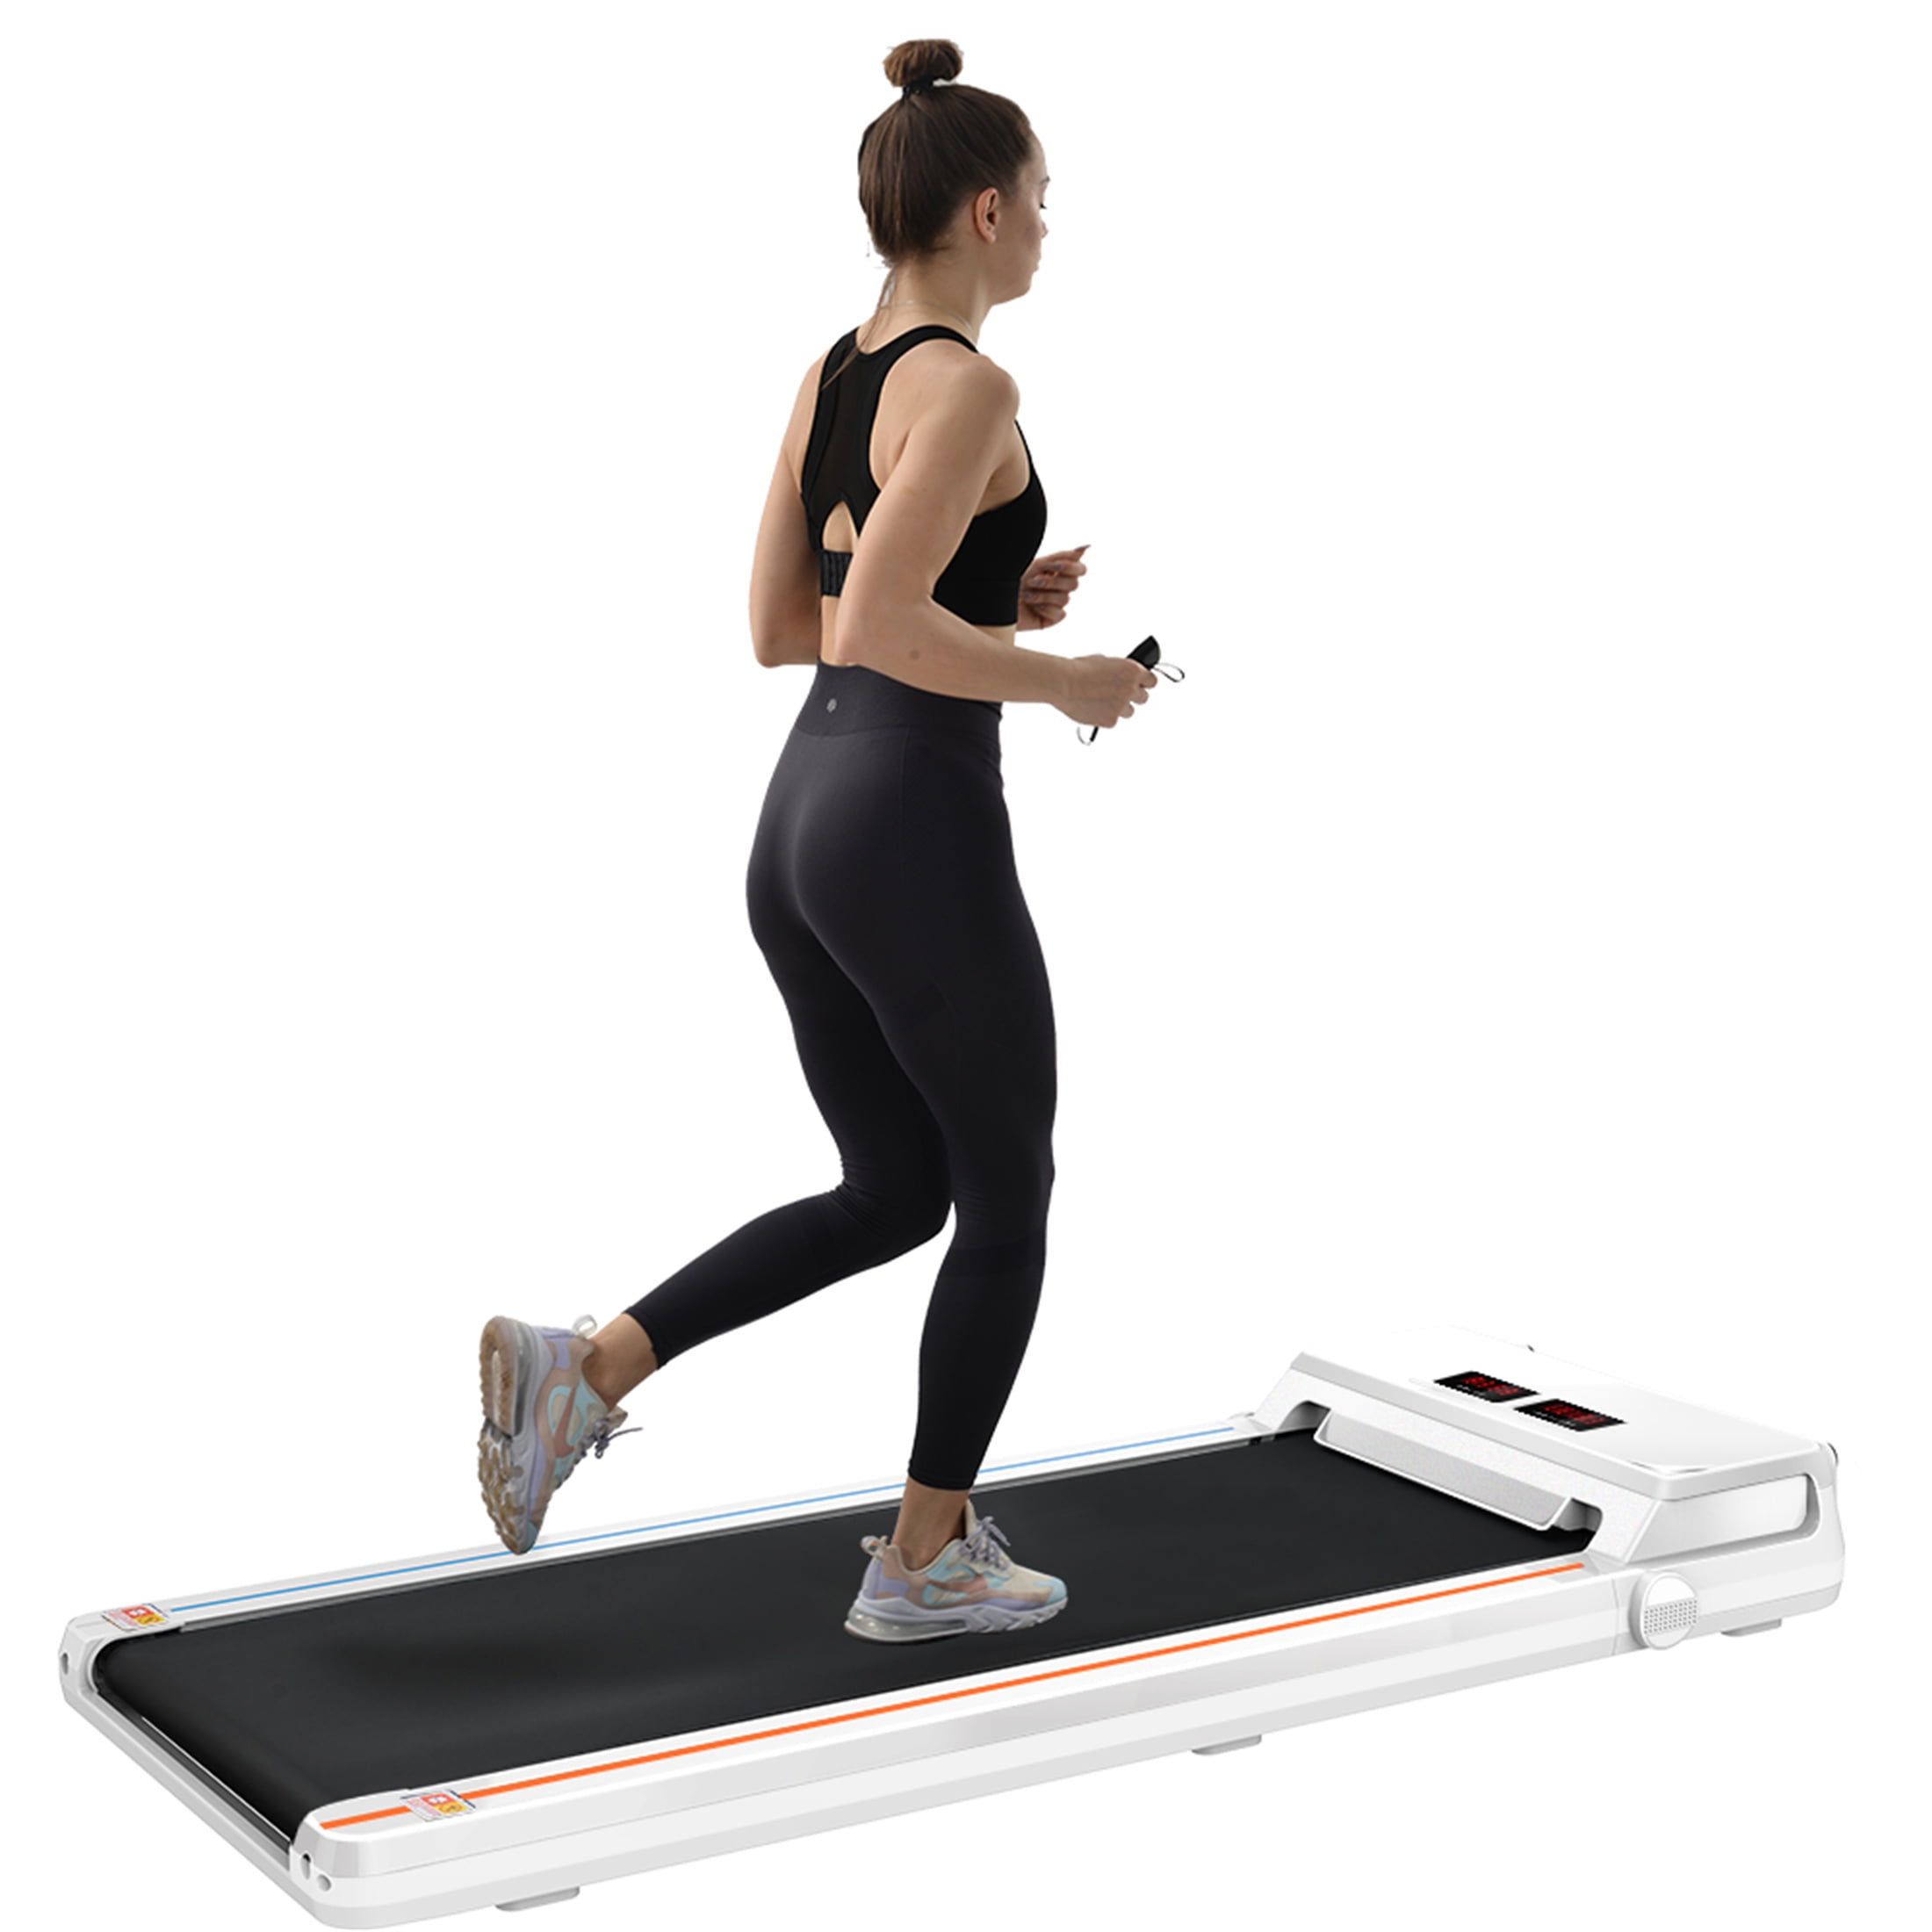 Walking Jogging Machine for Home/Office Use Portable Walking Pad with Remote Control Ultra-Quiet Walking Treadmill STAR POWER Under Desk Treadmill Black 